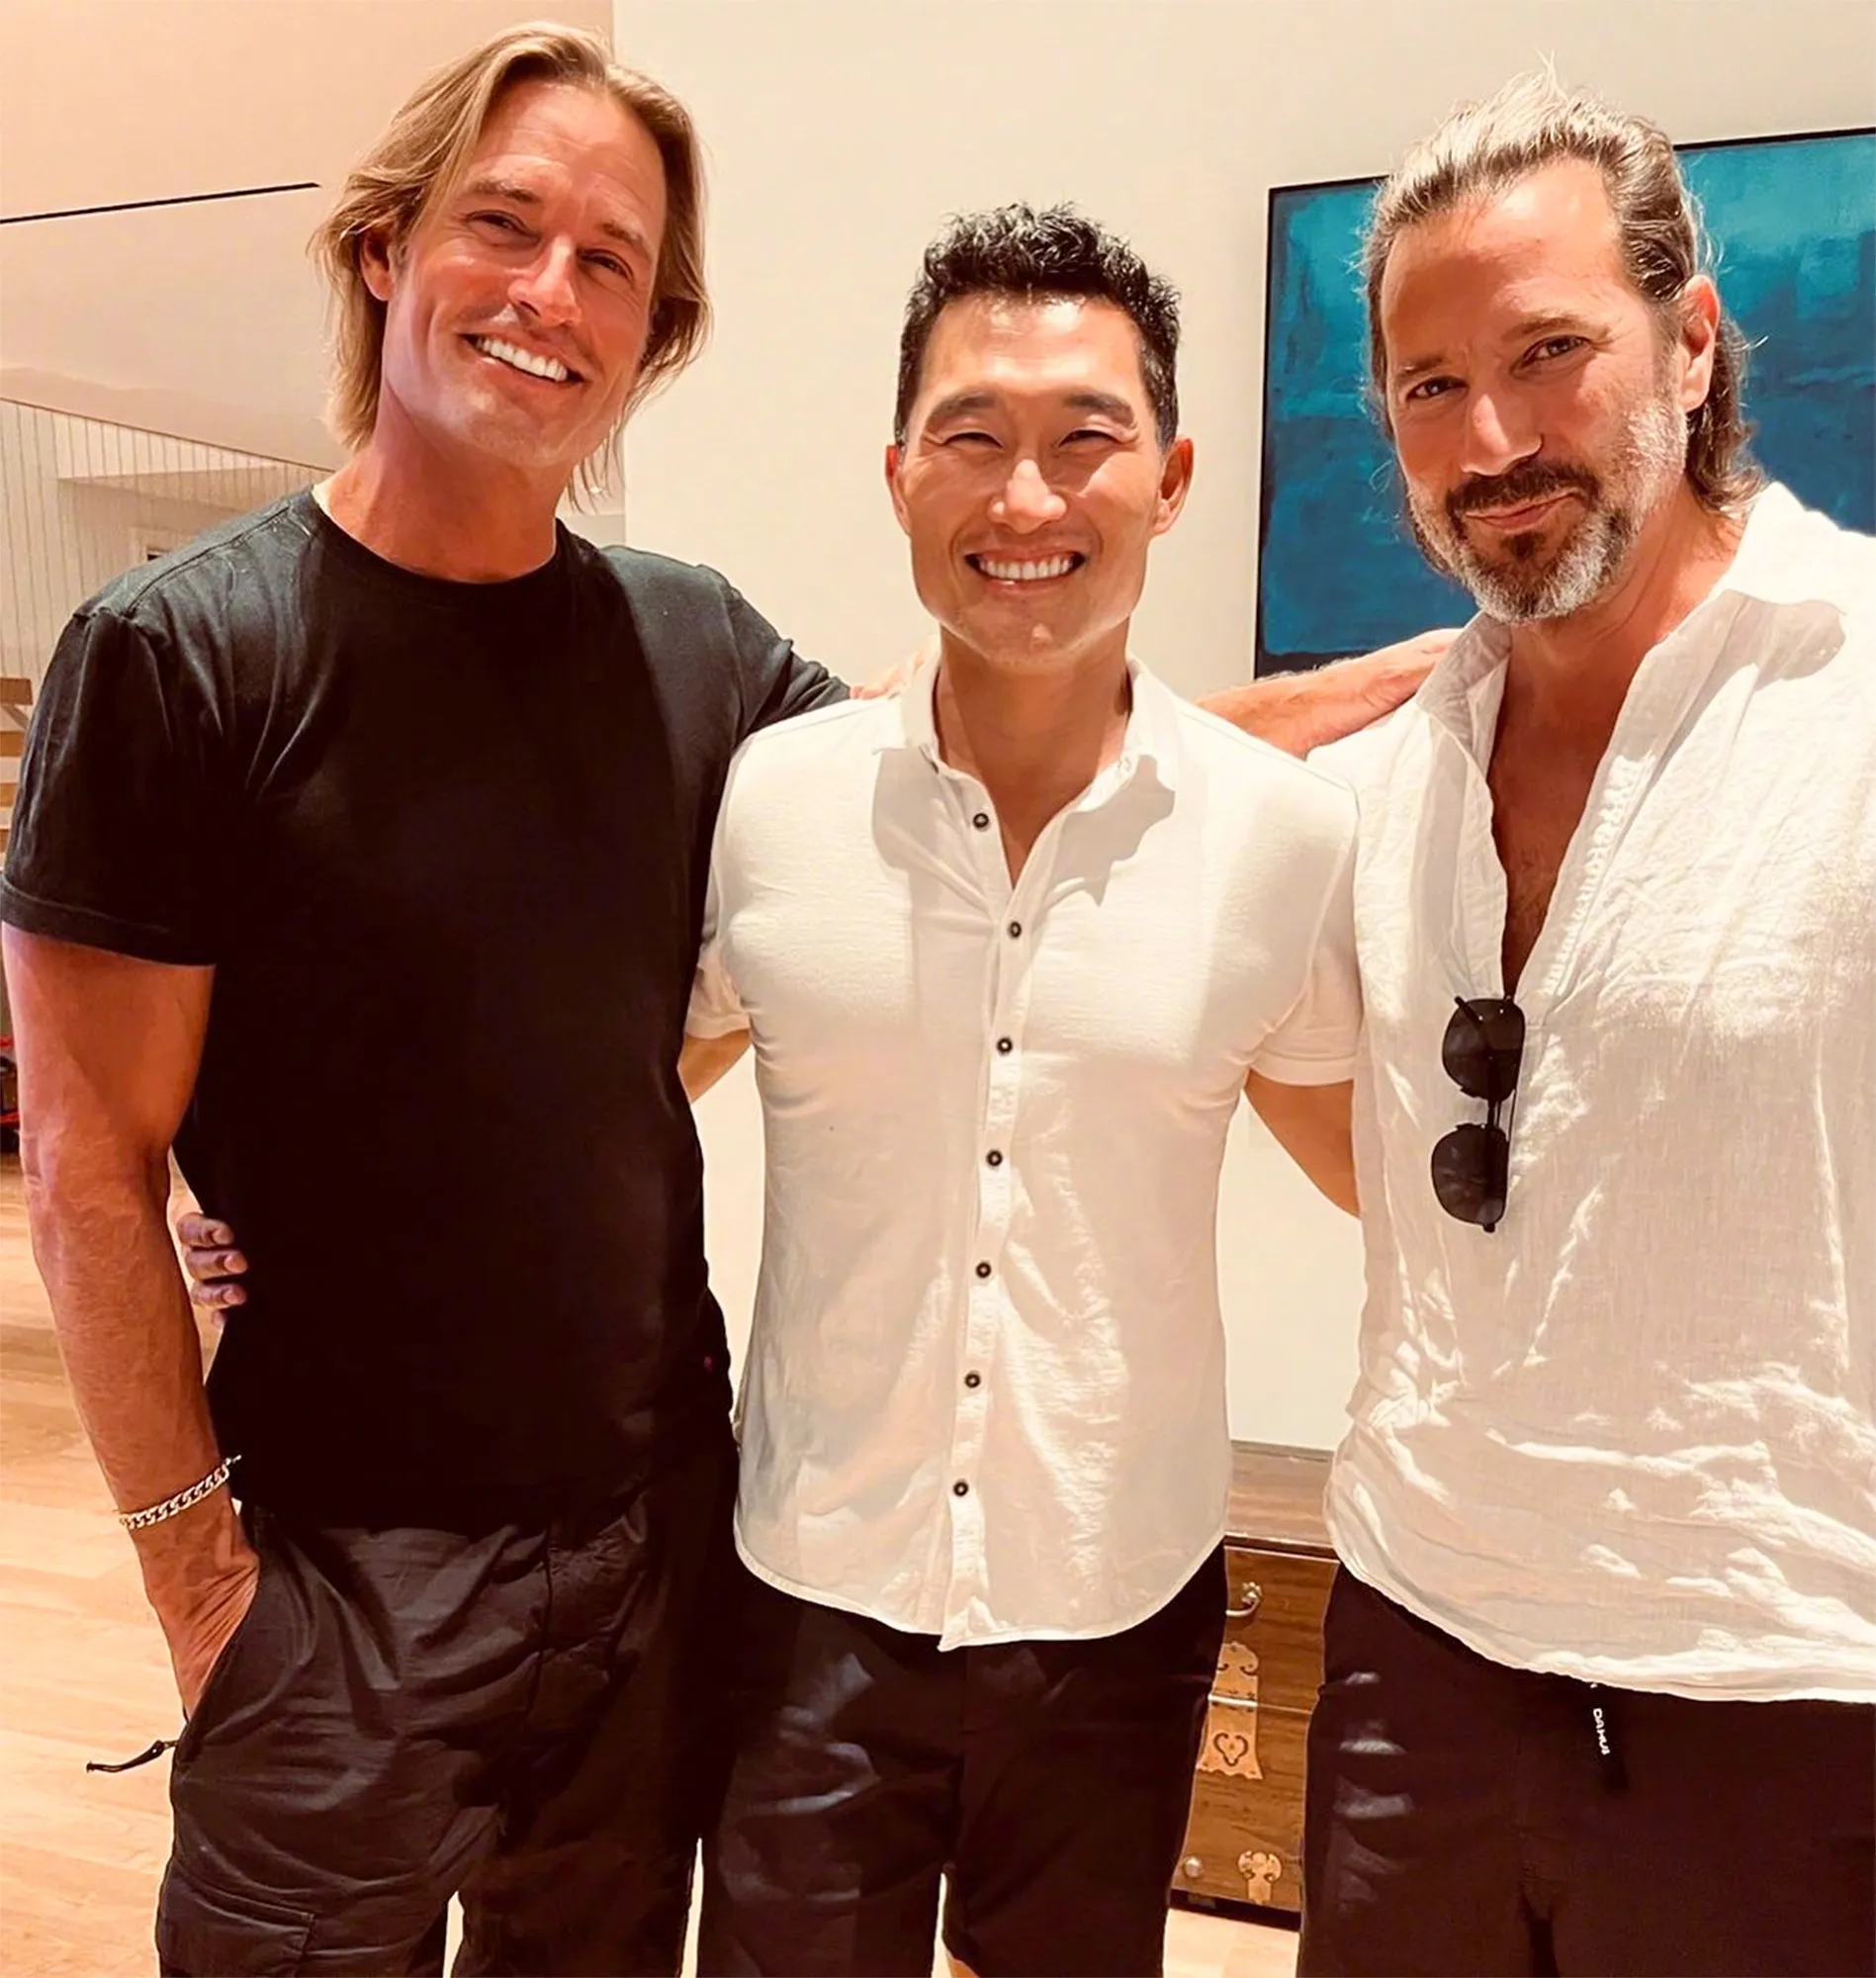 'Lost' cast reunites after 12 years, Josh Holloway shares recent photos with Daniel Dae Kim, Henry Ian Cusick | FMV6